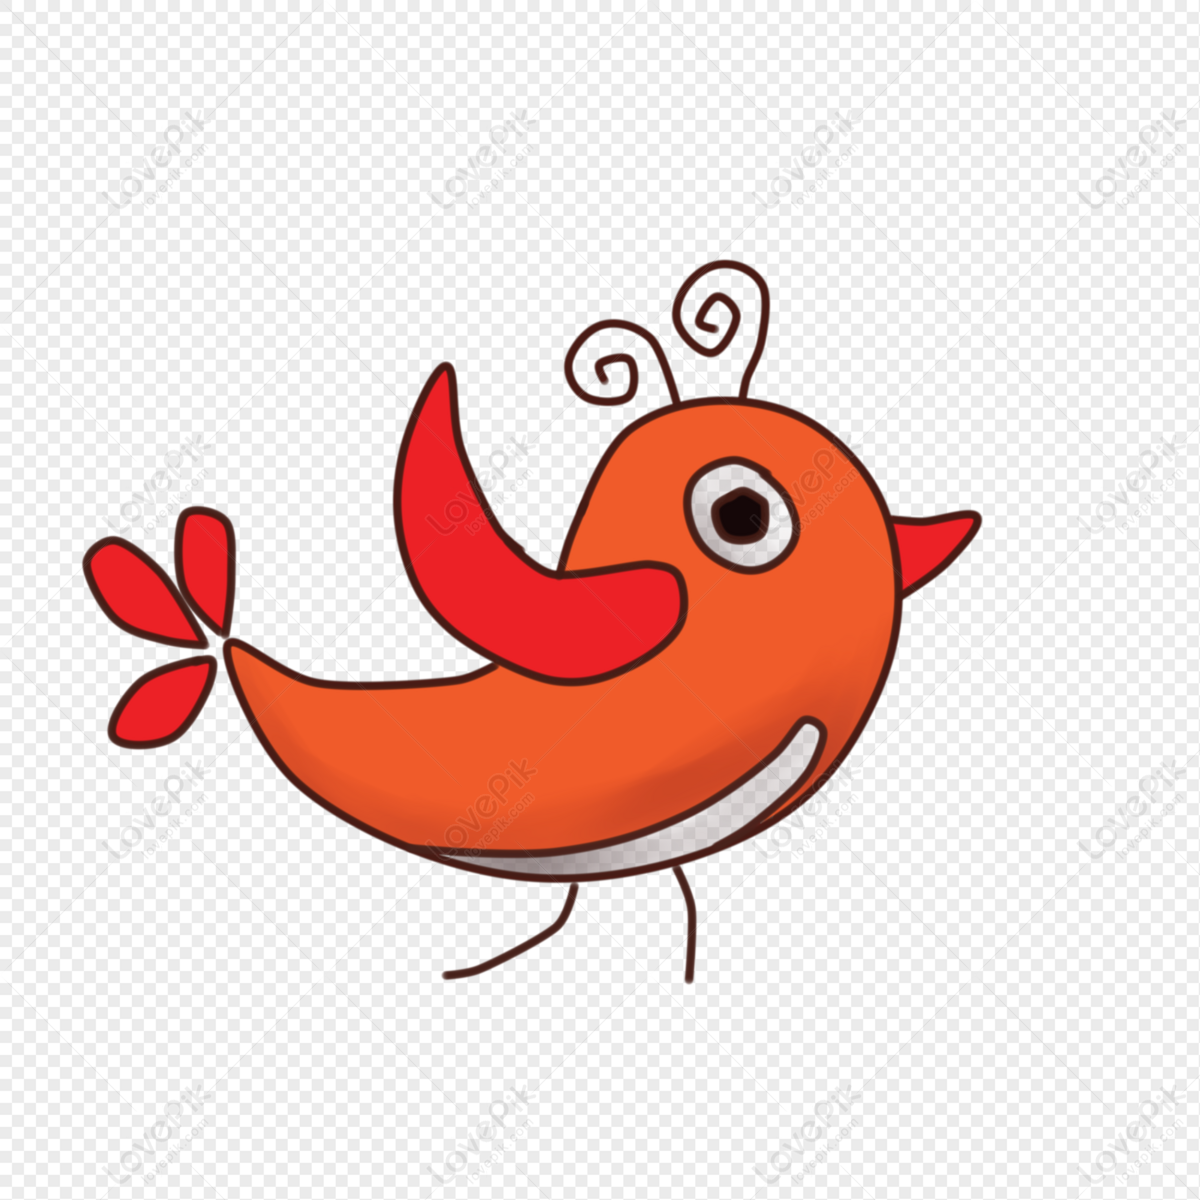 Bird Cartoon PNG White Transparent And Clipart Image For Free Download -  Lovepik | 401053262